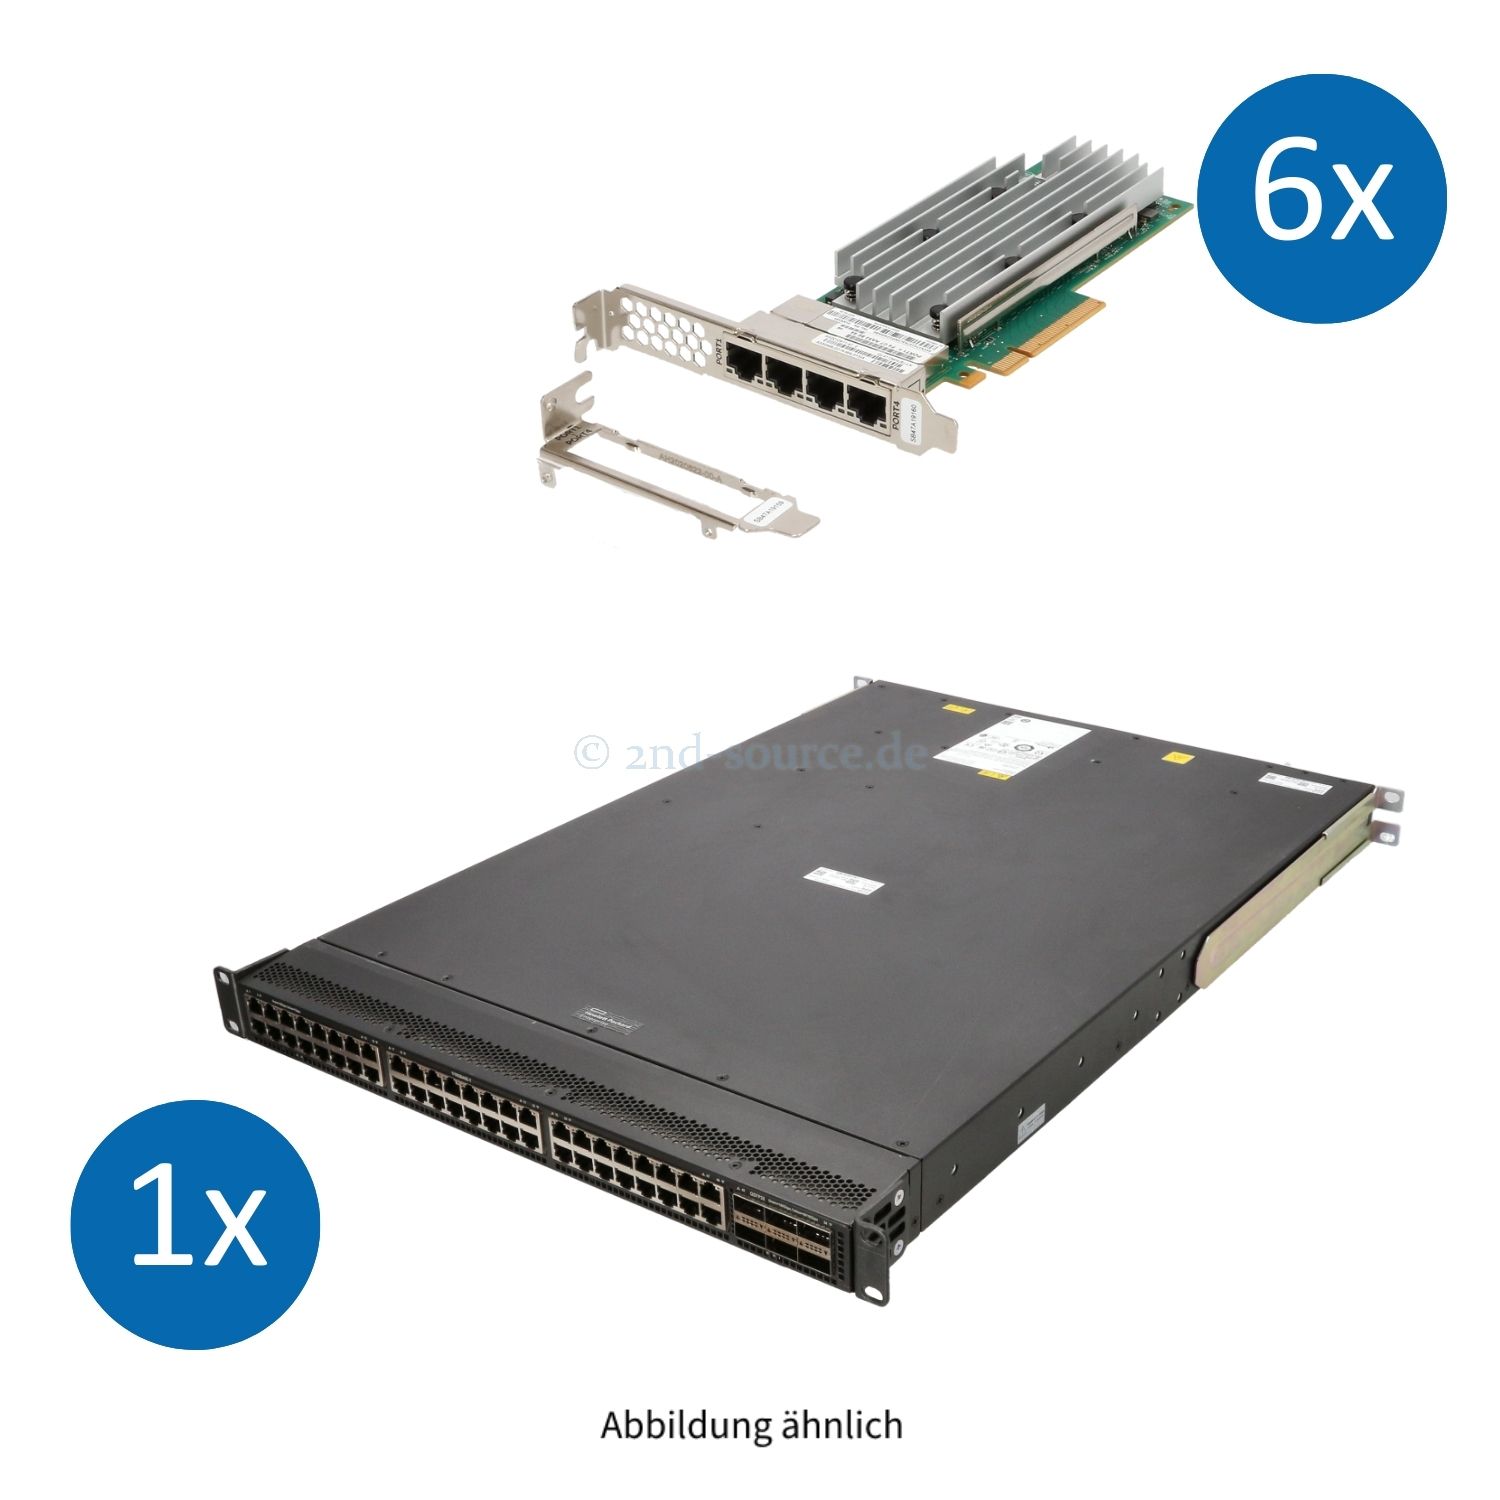 Starterset "XL" HPE FlexFabric 5940 48x 10GBase-T 6x QSFP28 Front to Back Managed Switch 2x PSU und 6x QLogic QL41134 4x 10GBase-T PCIe Server Ethernet Adapter